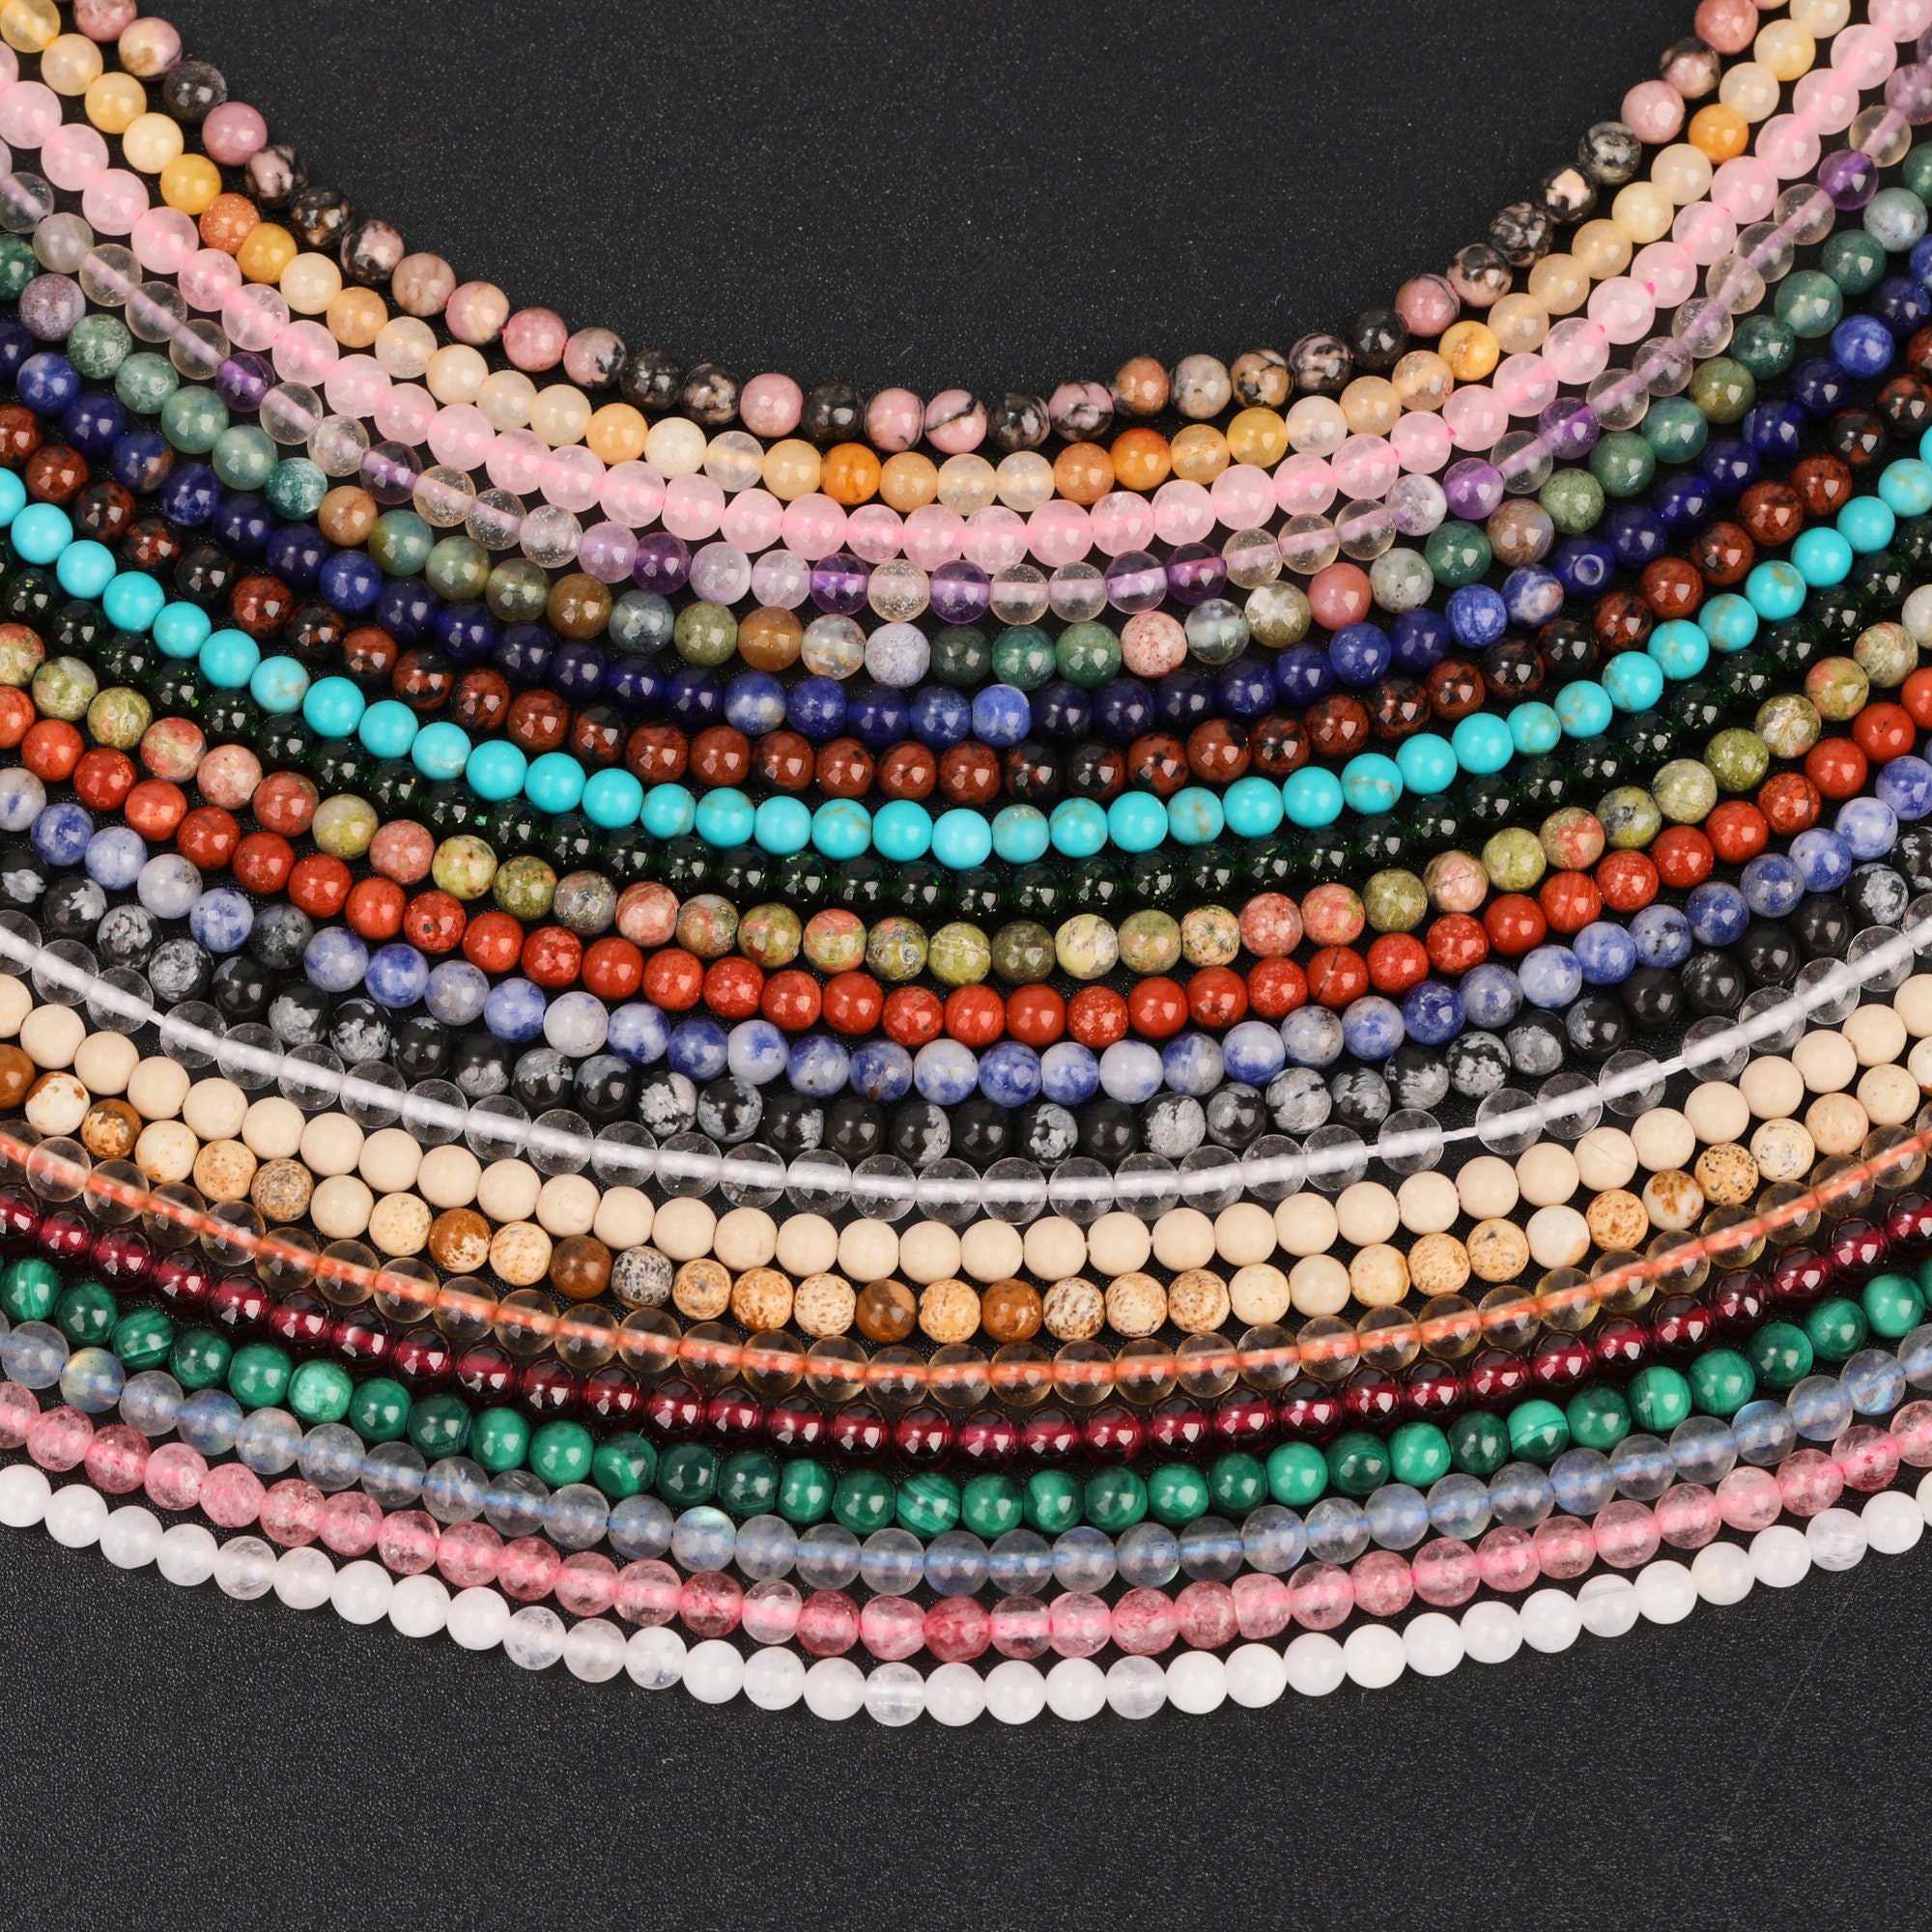 Small Beads Natural Stone Gem Beads Round Faceted Section Beads For Jewelry  Making Necklace DIY Bracelet 38cm Size 2 3 4 mm 38cm - AliExpress